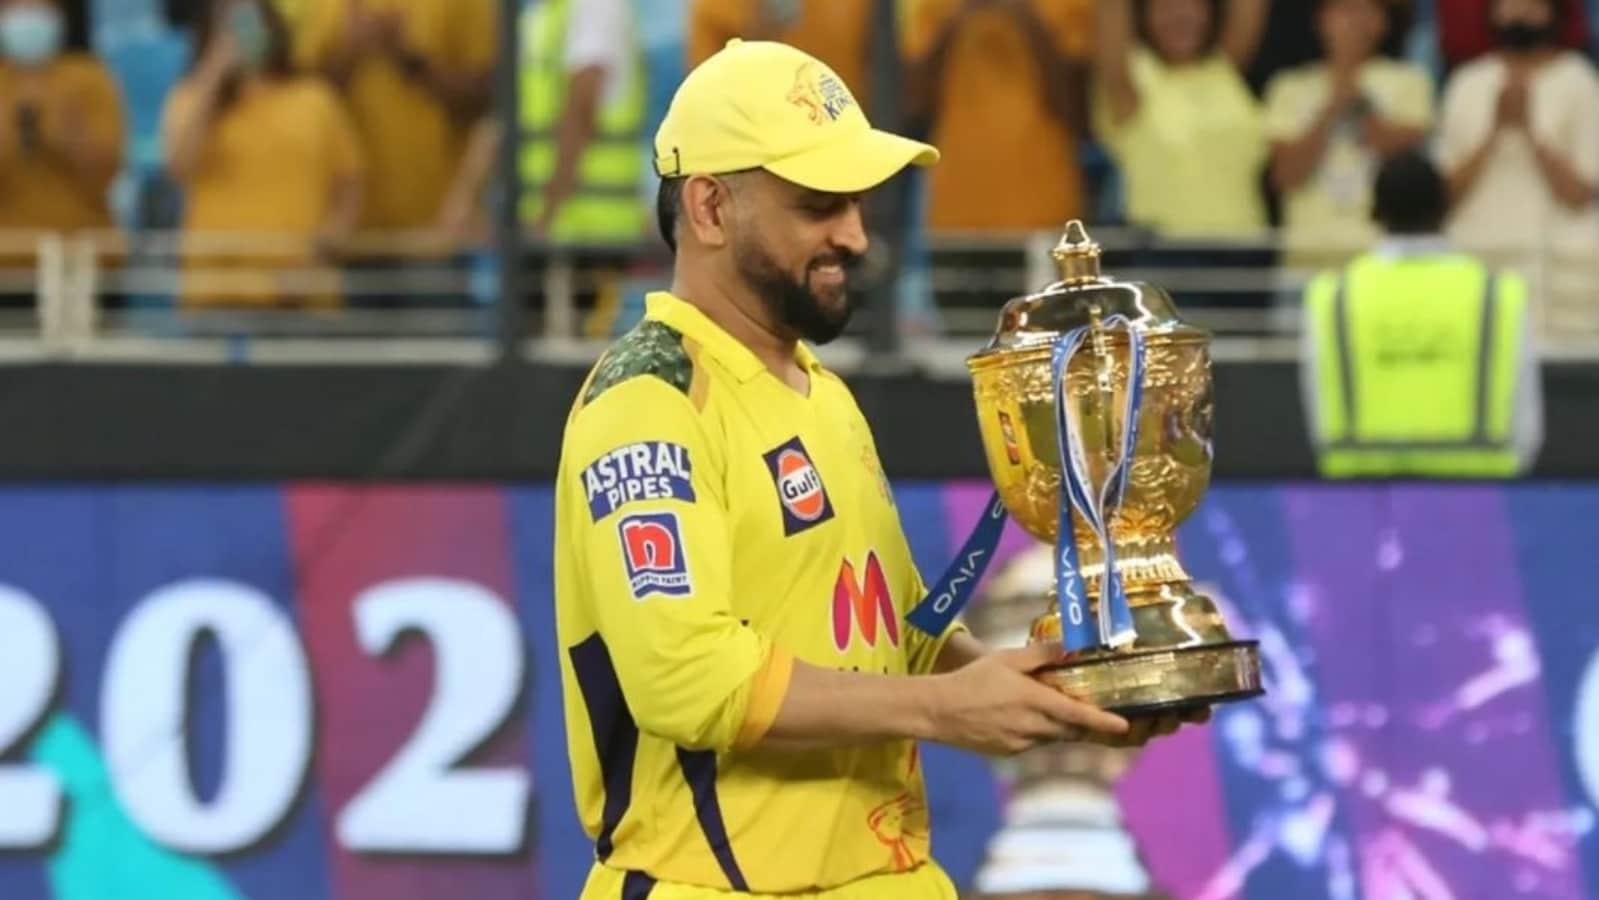 CSK vs KKR LIVE: Dhoni quits captaincy, Will he also move out of CSK Playing XI? Follow IPL 2022 Live Updates